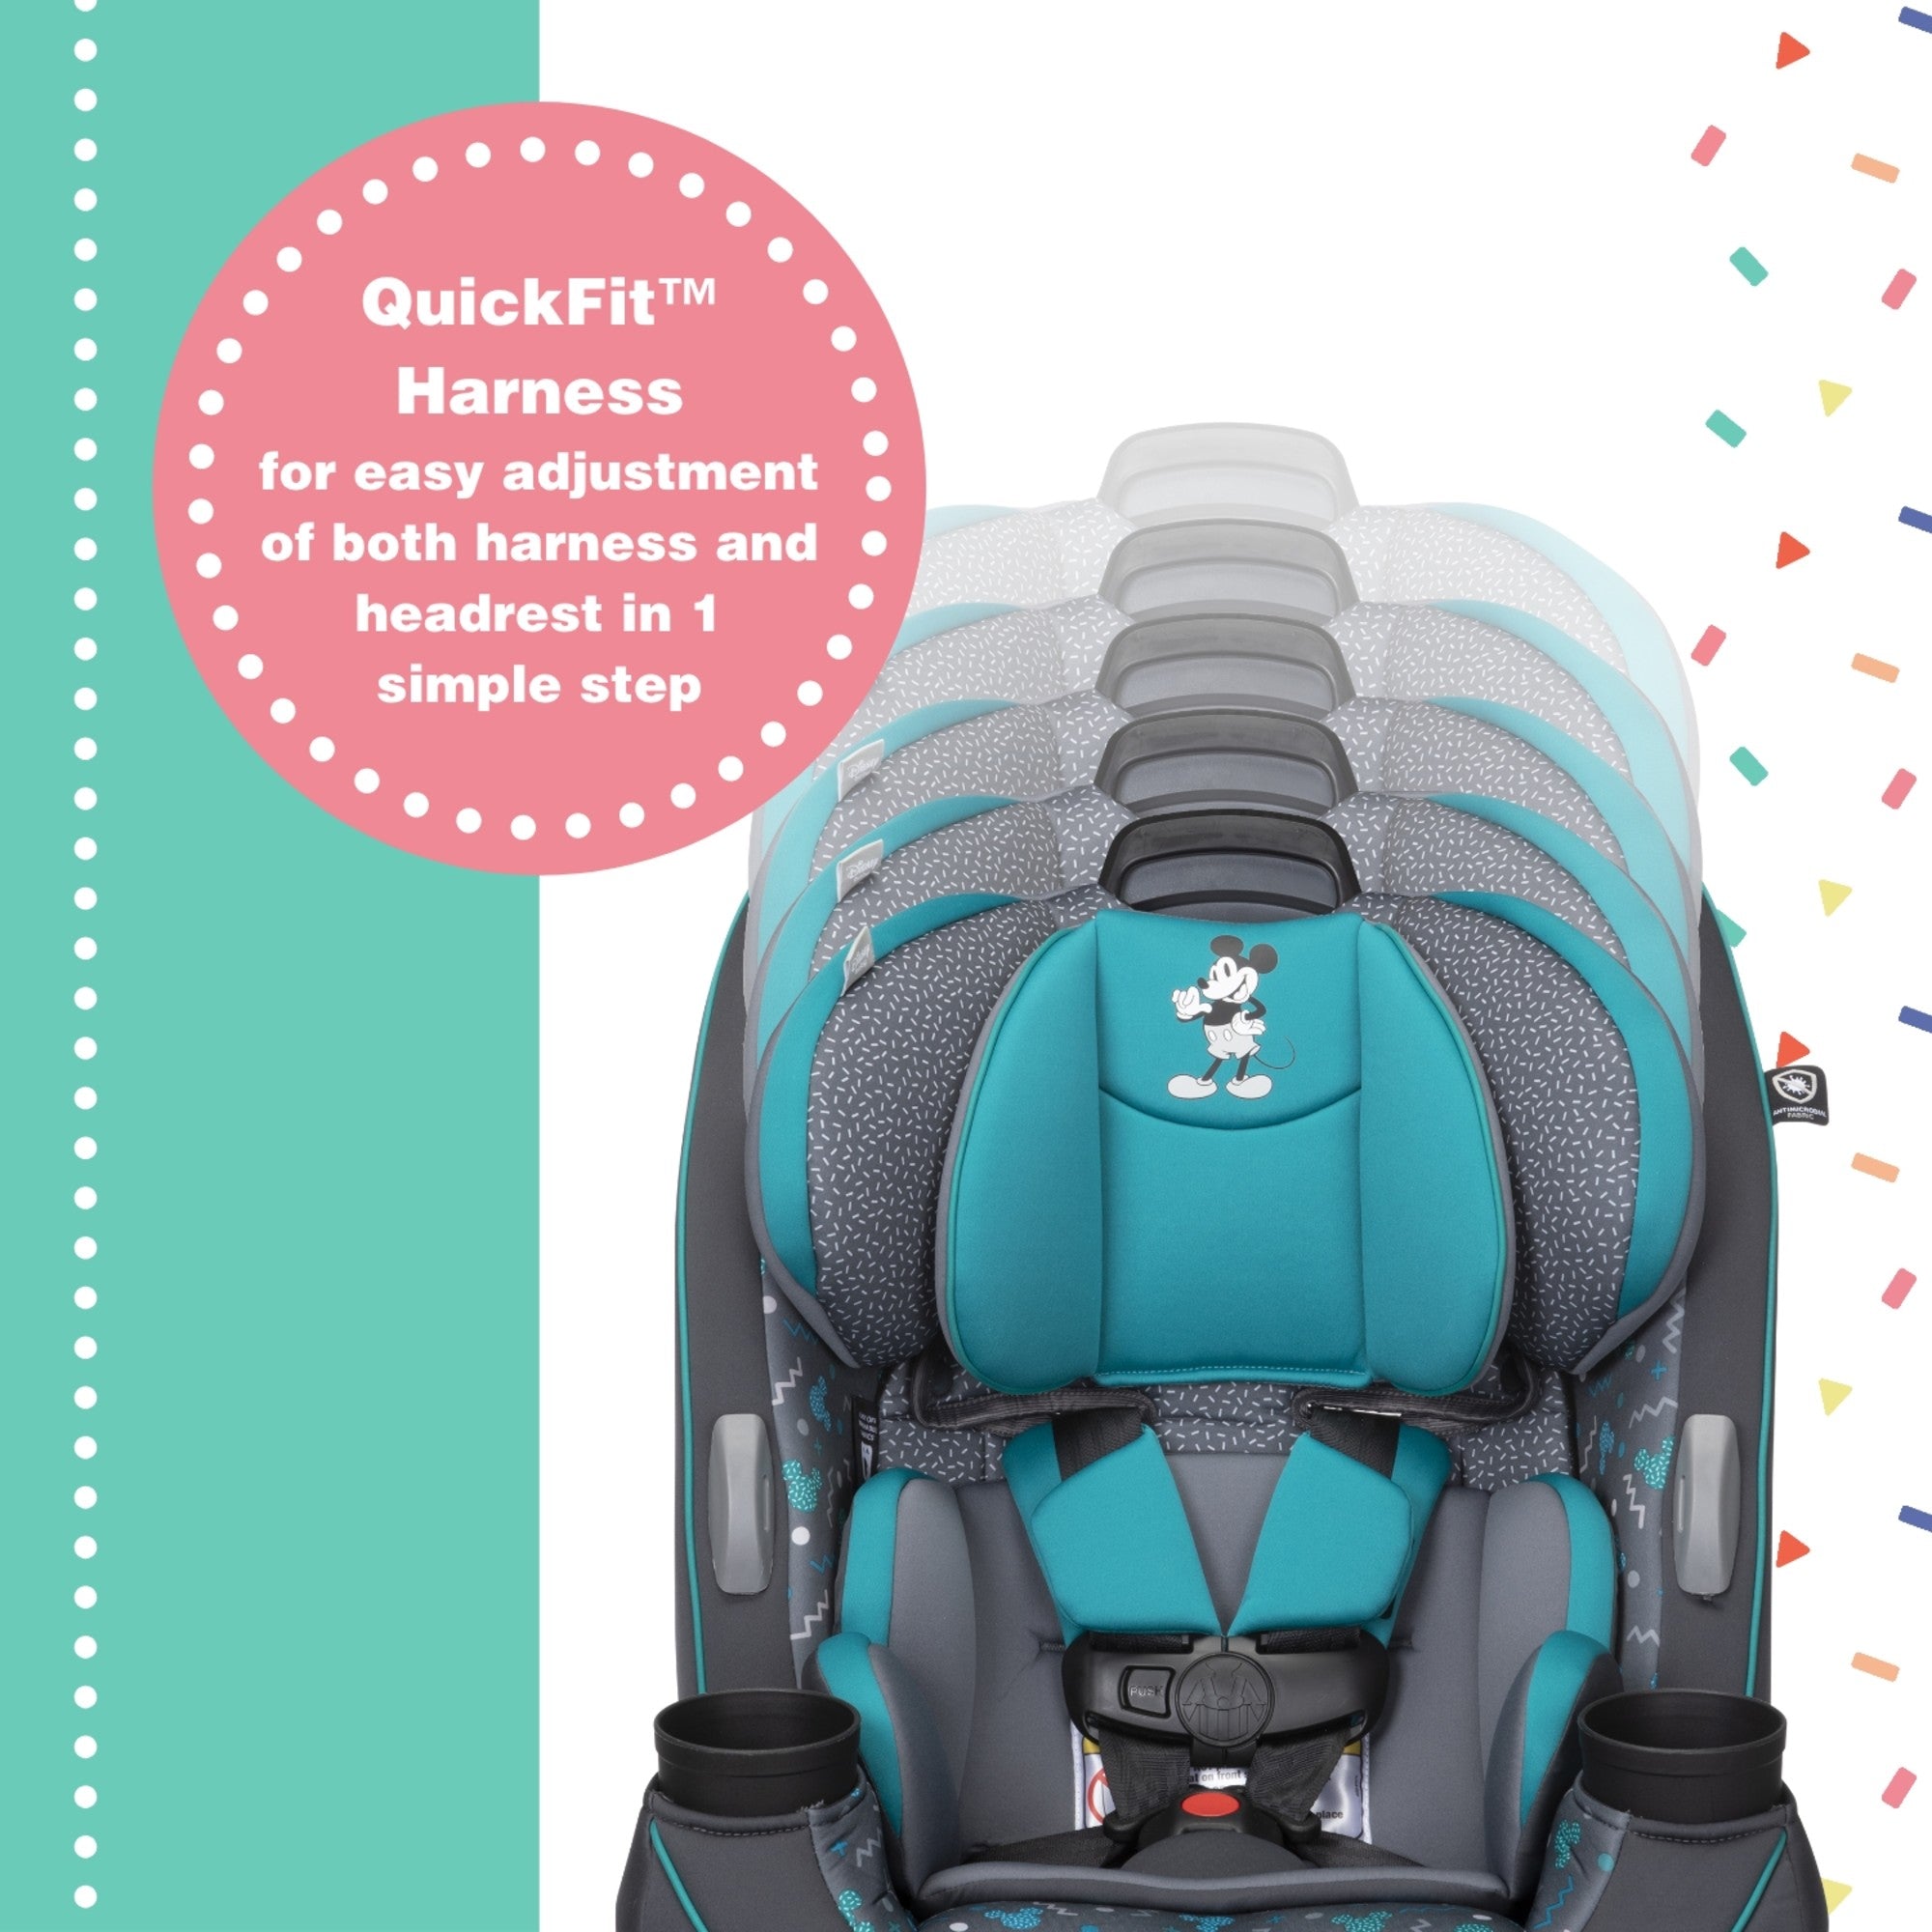 Disney Baby Grow and Go™ All-in-One Convertible Car Seat - QuickFit Harness for easy adjustment of both harness and headrest in 1 simple step